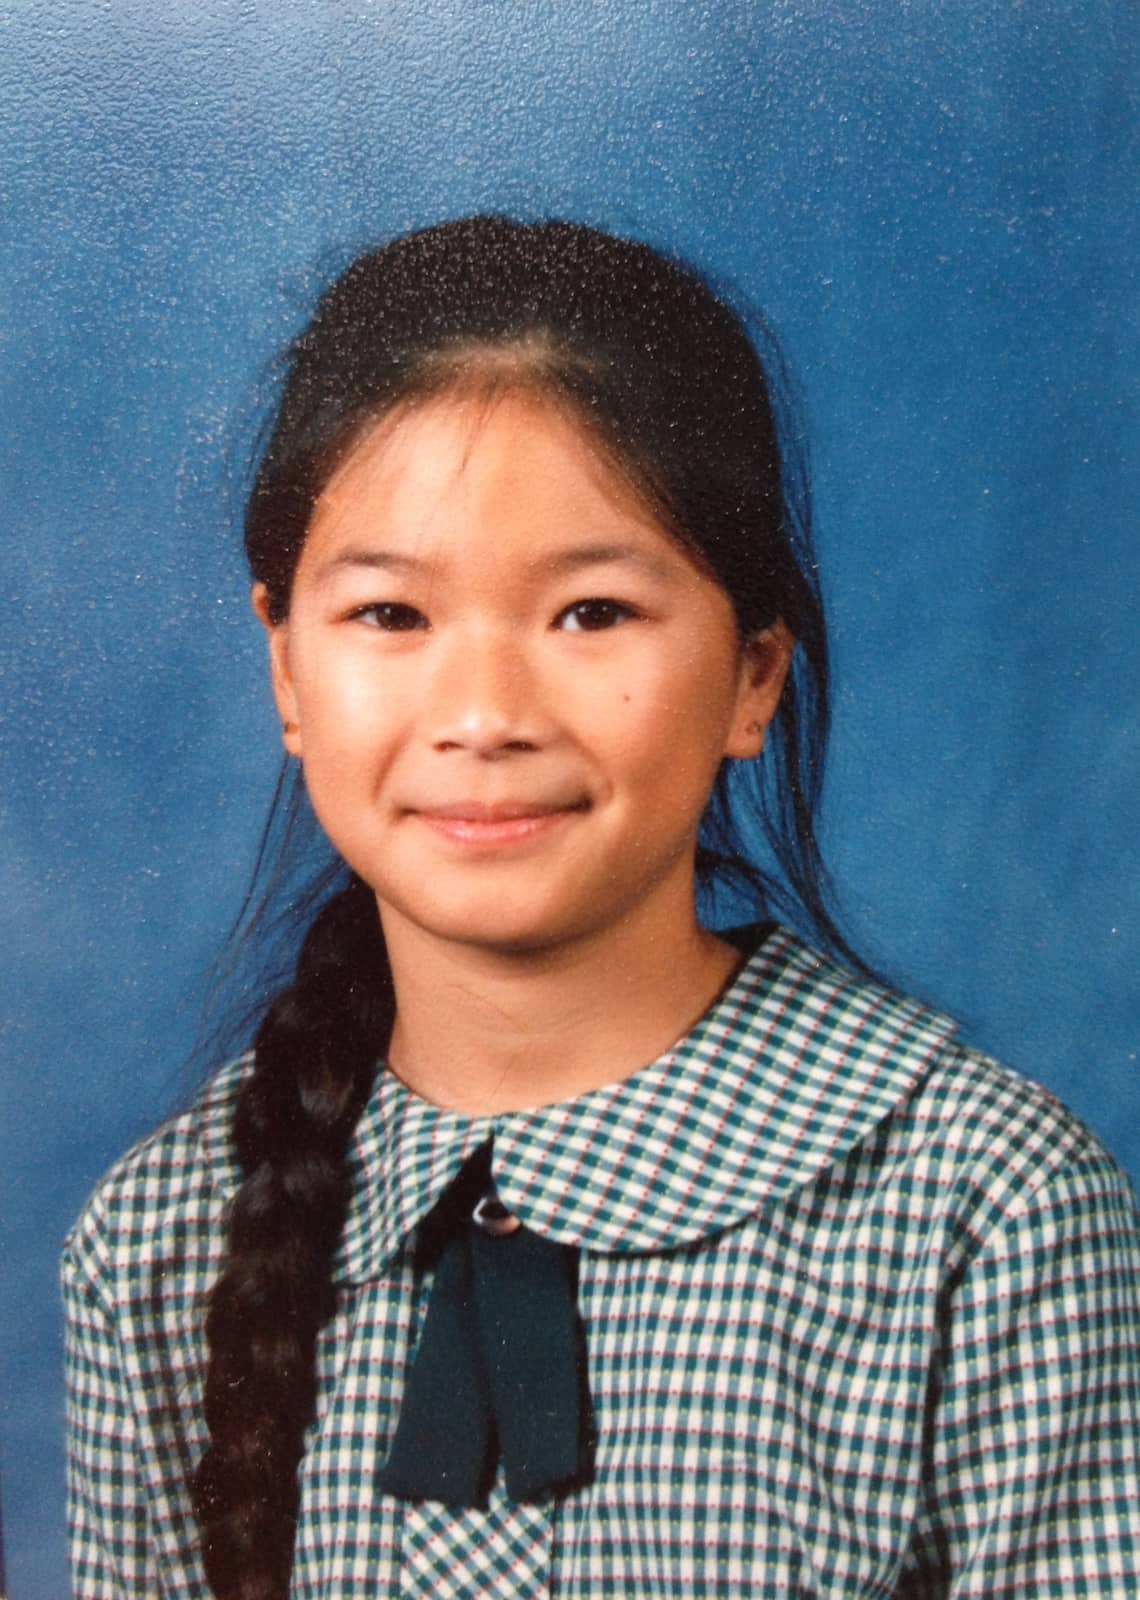 A girl in her school photo, in uniform, with her braided hair placed over her shoulder and in front.